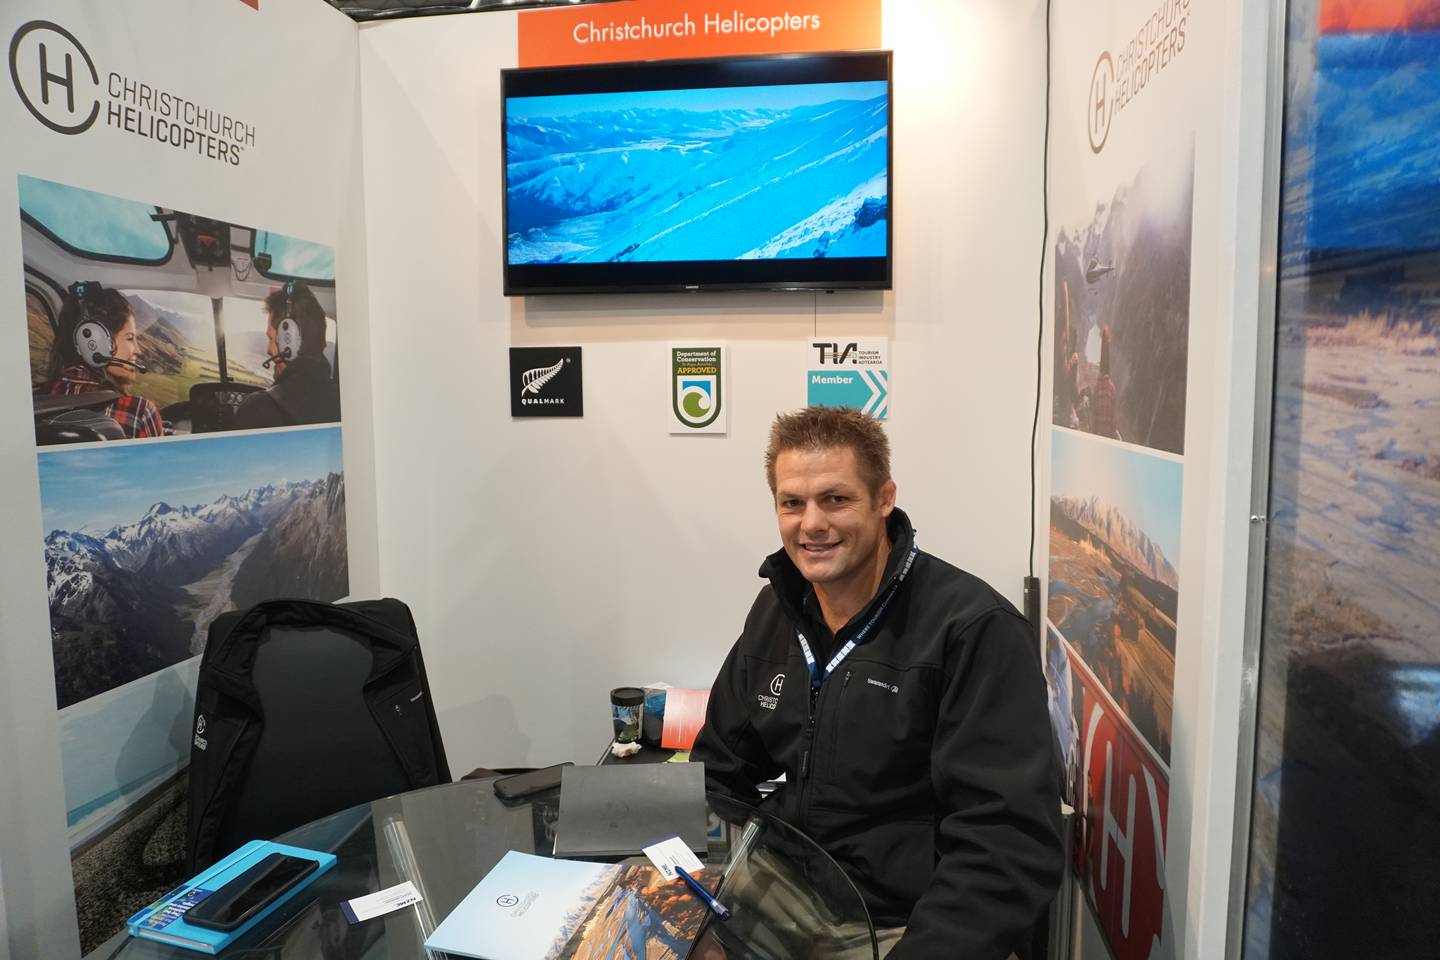 Richie McCaw at the Christchurch Helicopters stand at Trenz in Dunedin this week. Photo: NZ Herald
